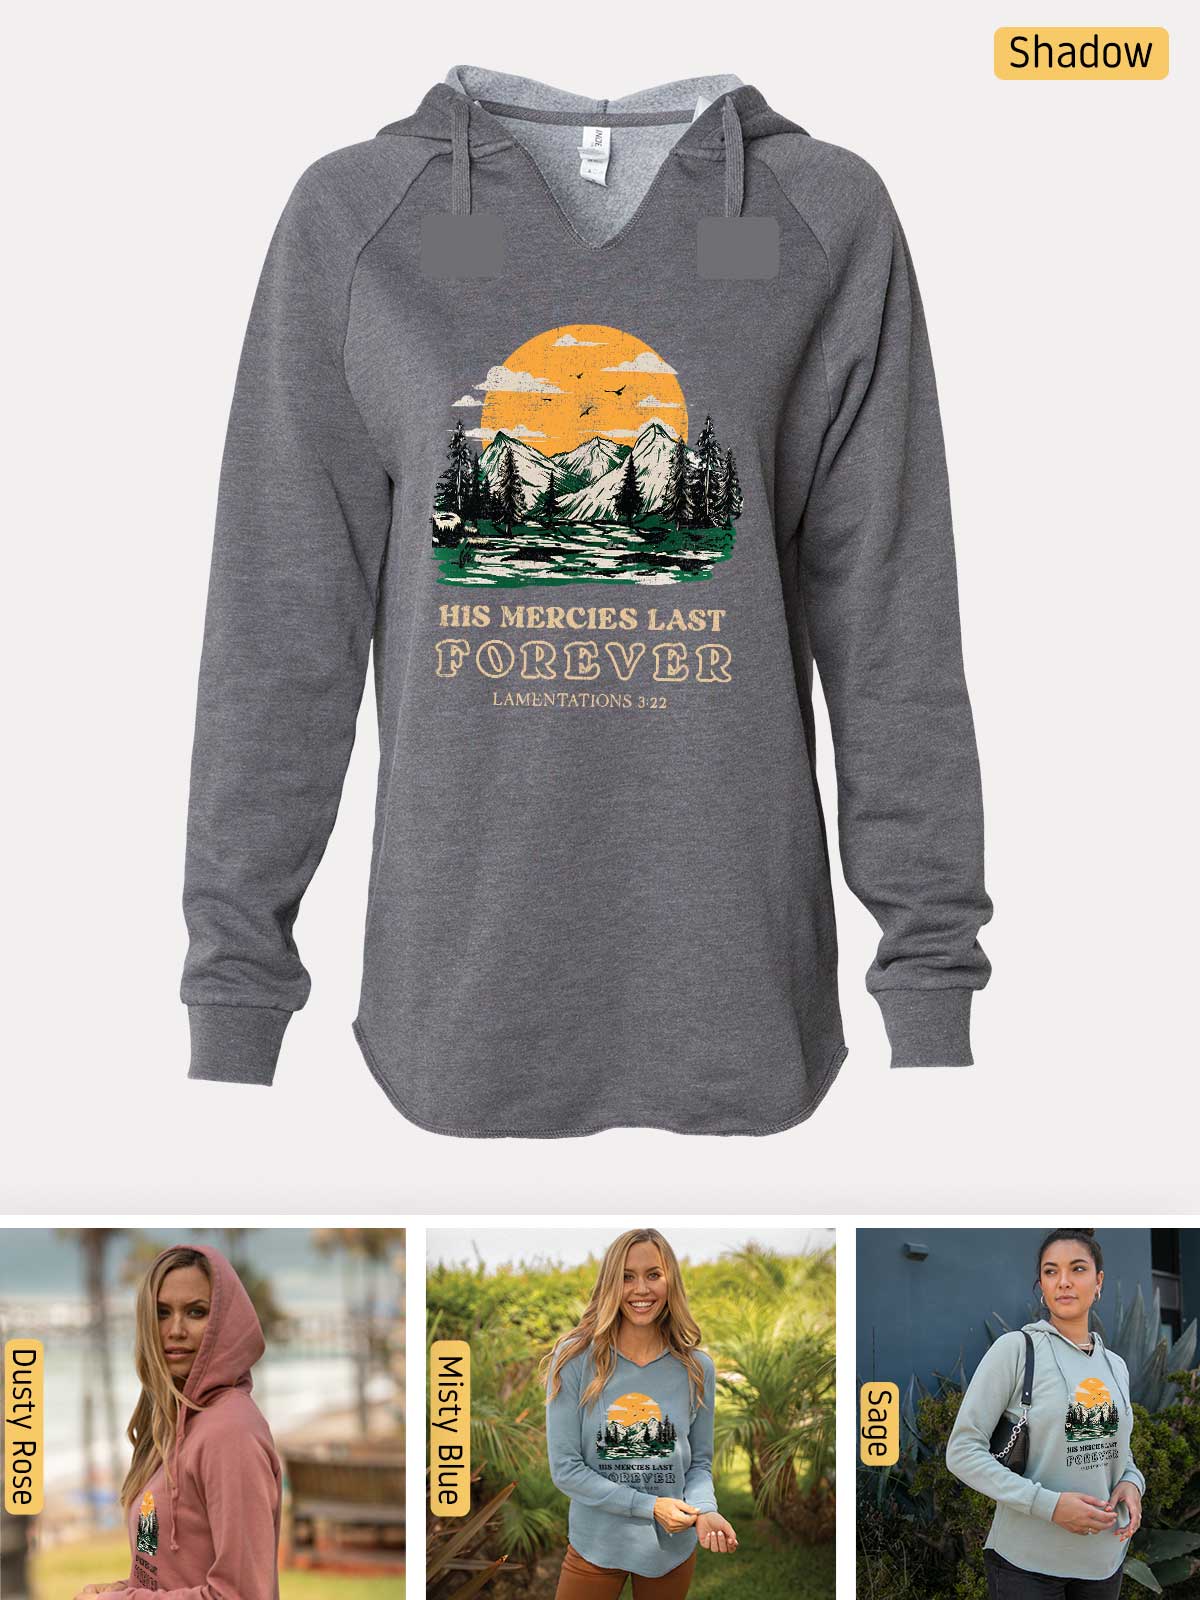 a women's sweatshirt with a picture of a woman wearing a hoodie